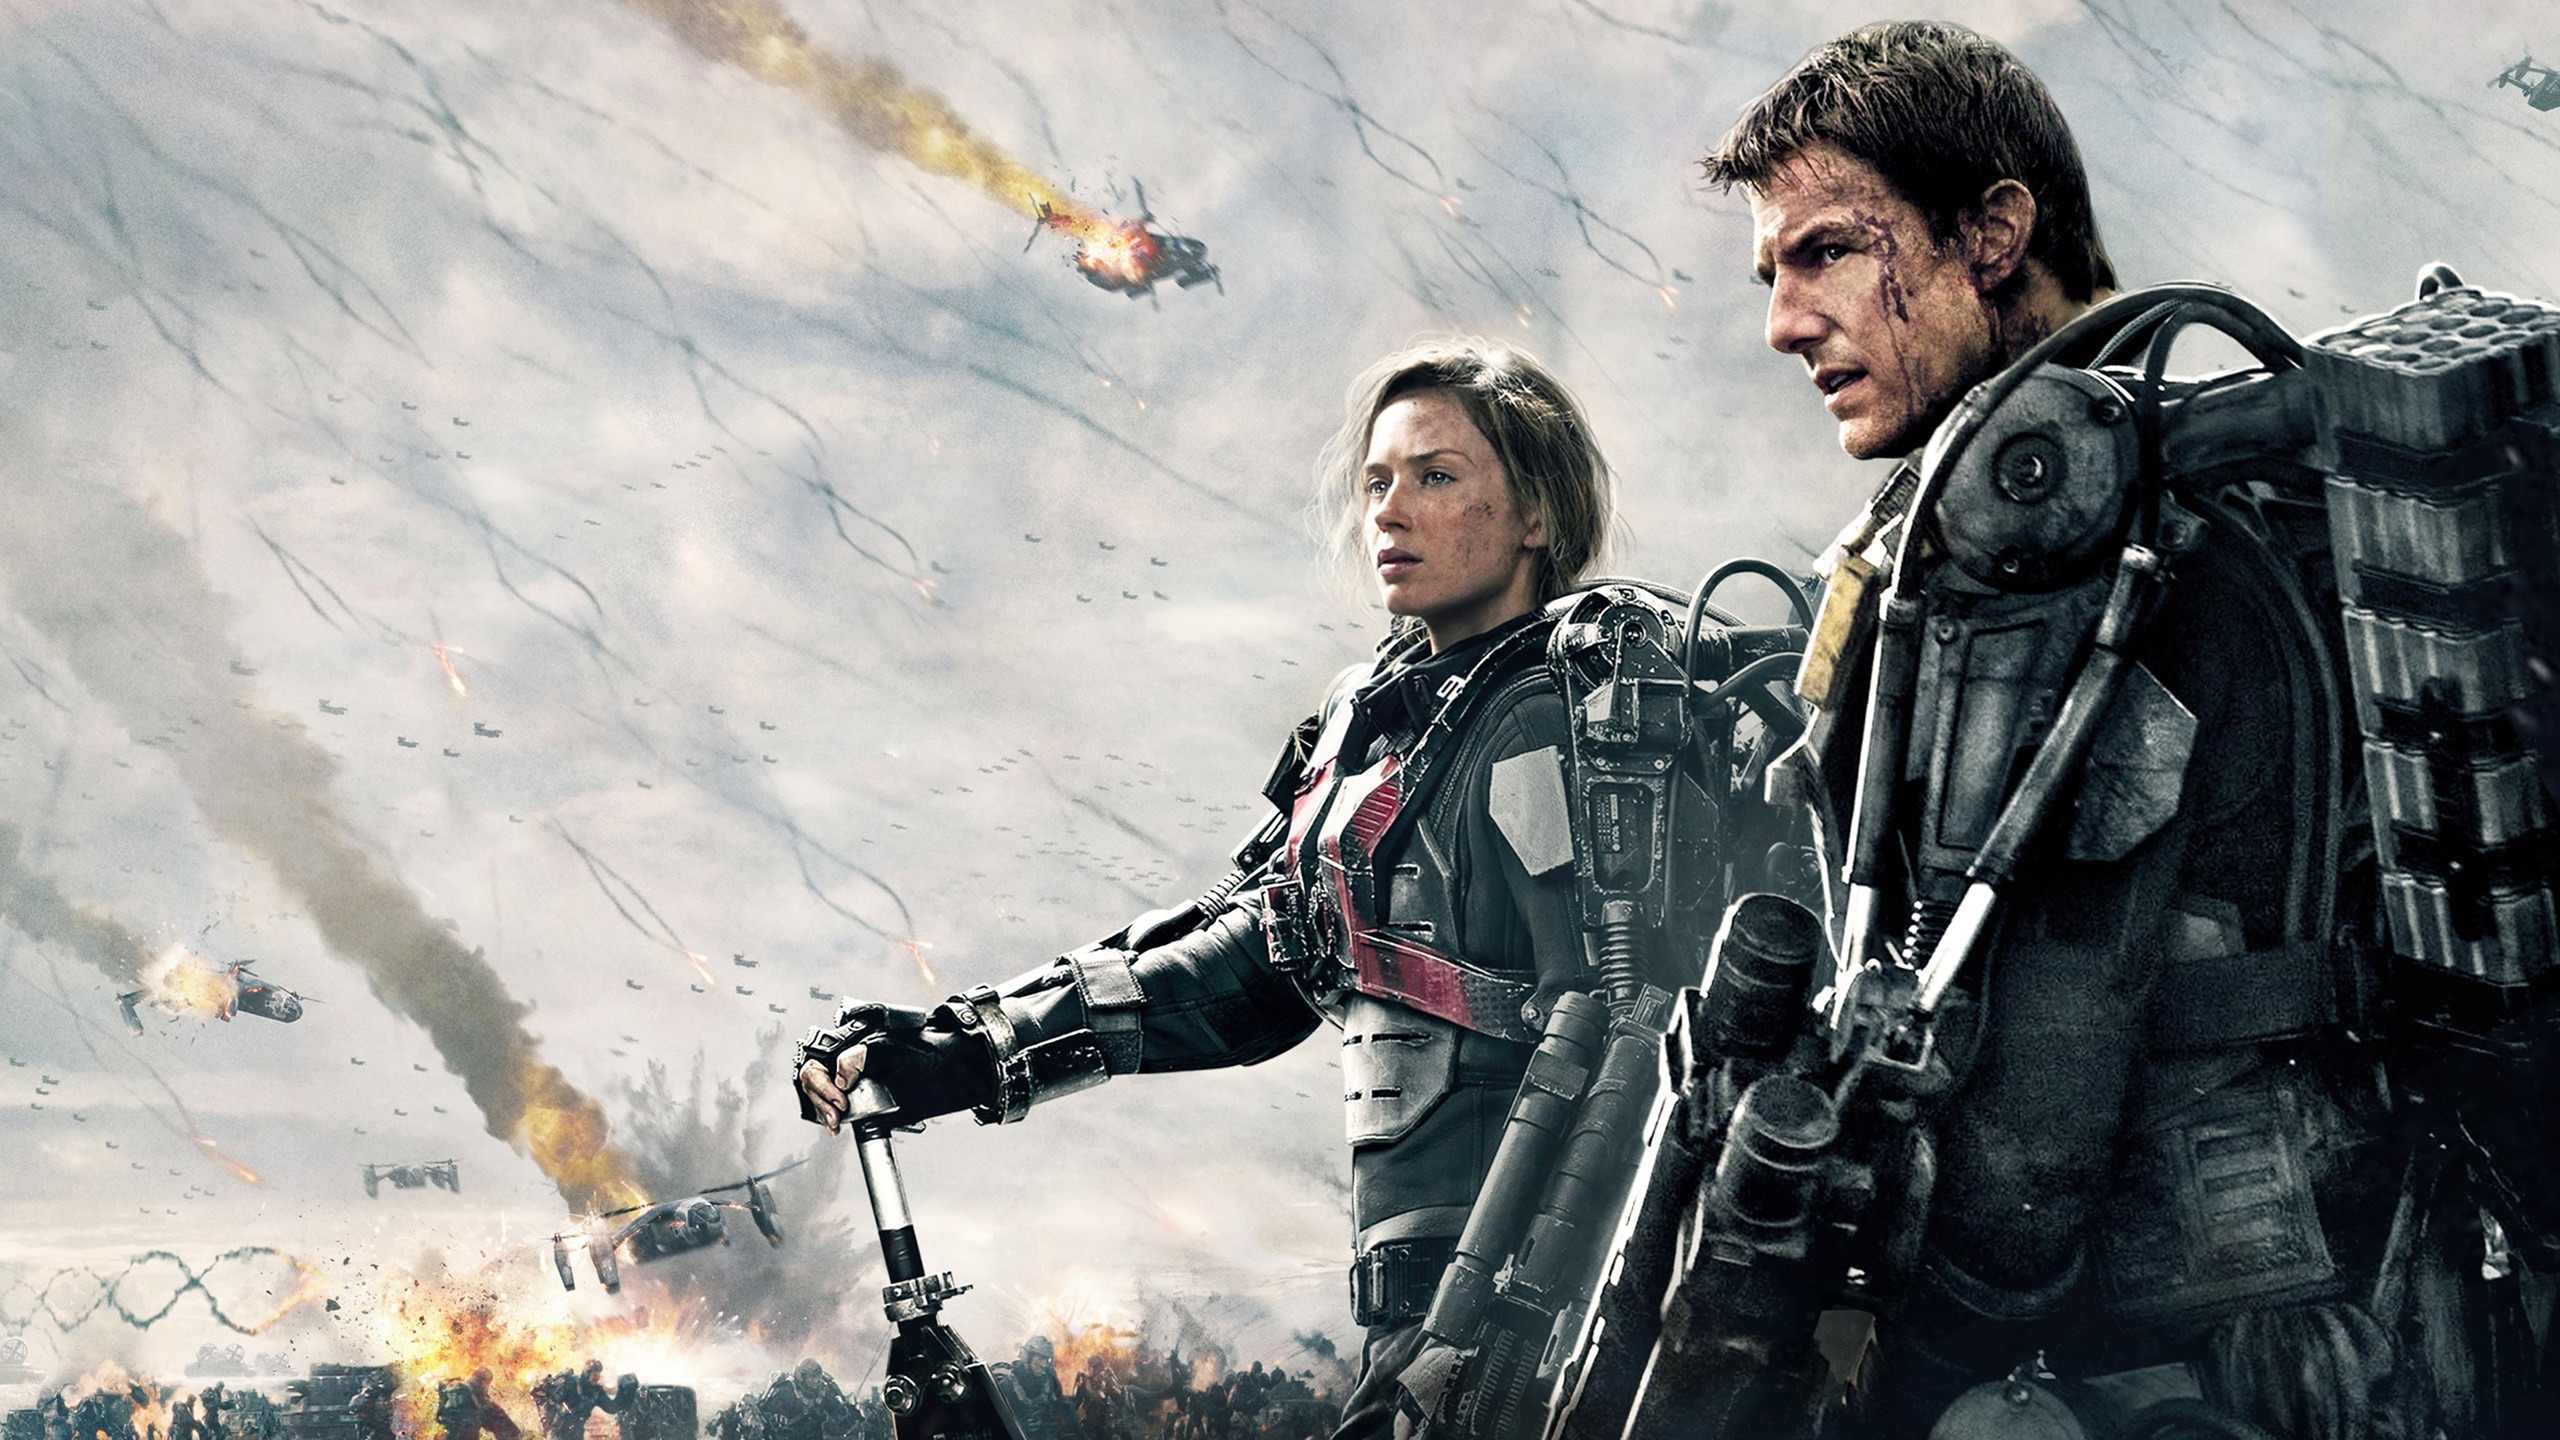 Edge of Tomorrow 2014 for 2560x1440 HDTV resolution